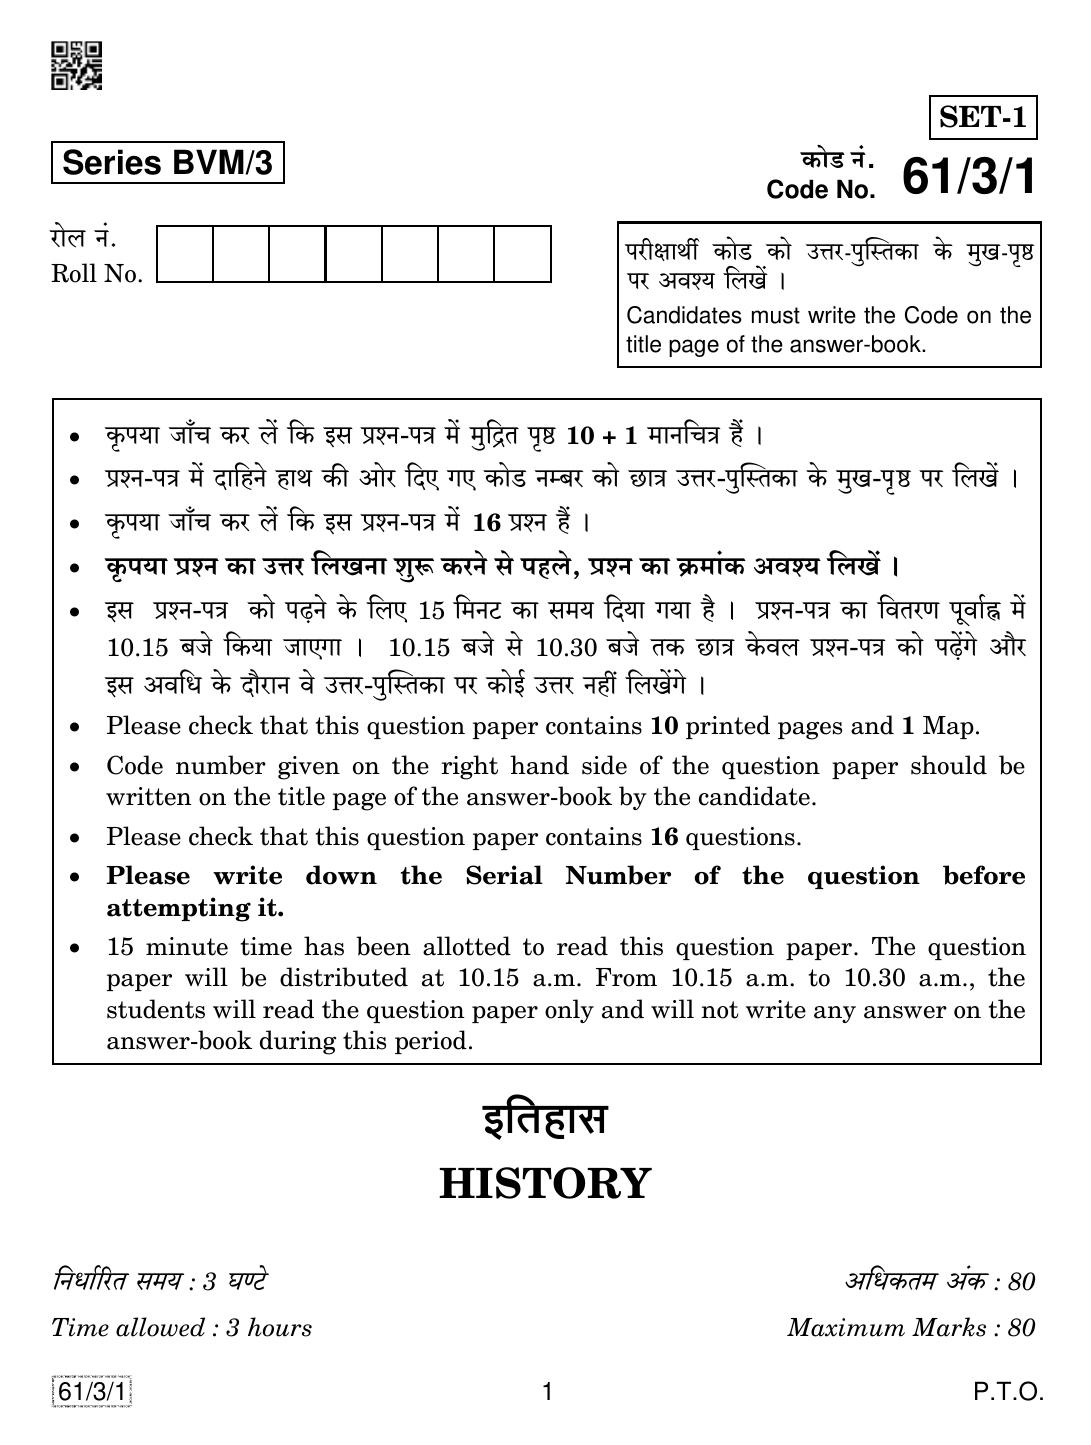 CBSE Class 12 61-3-1 History 2019 Question Paper - Page 1